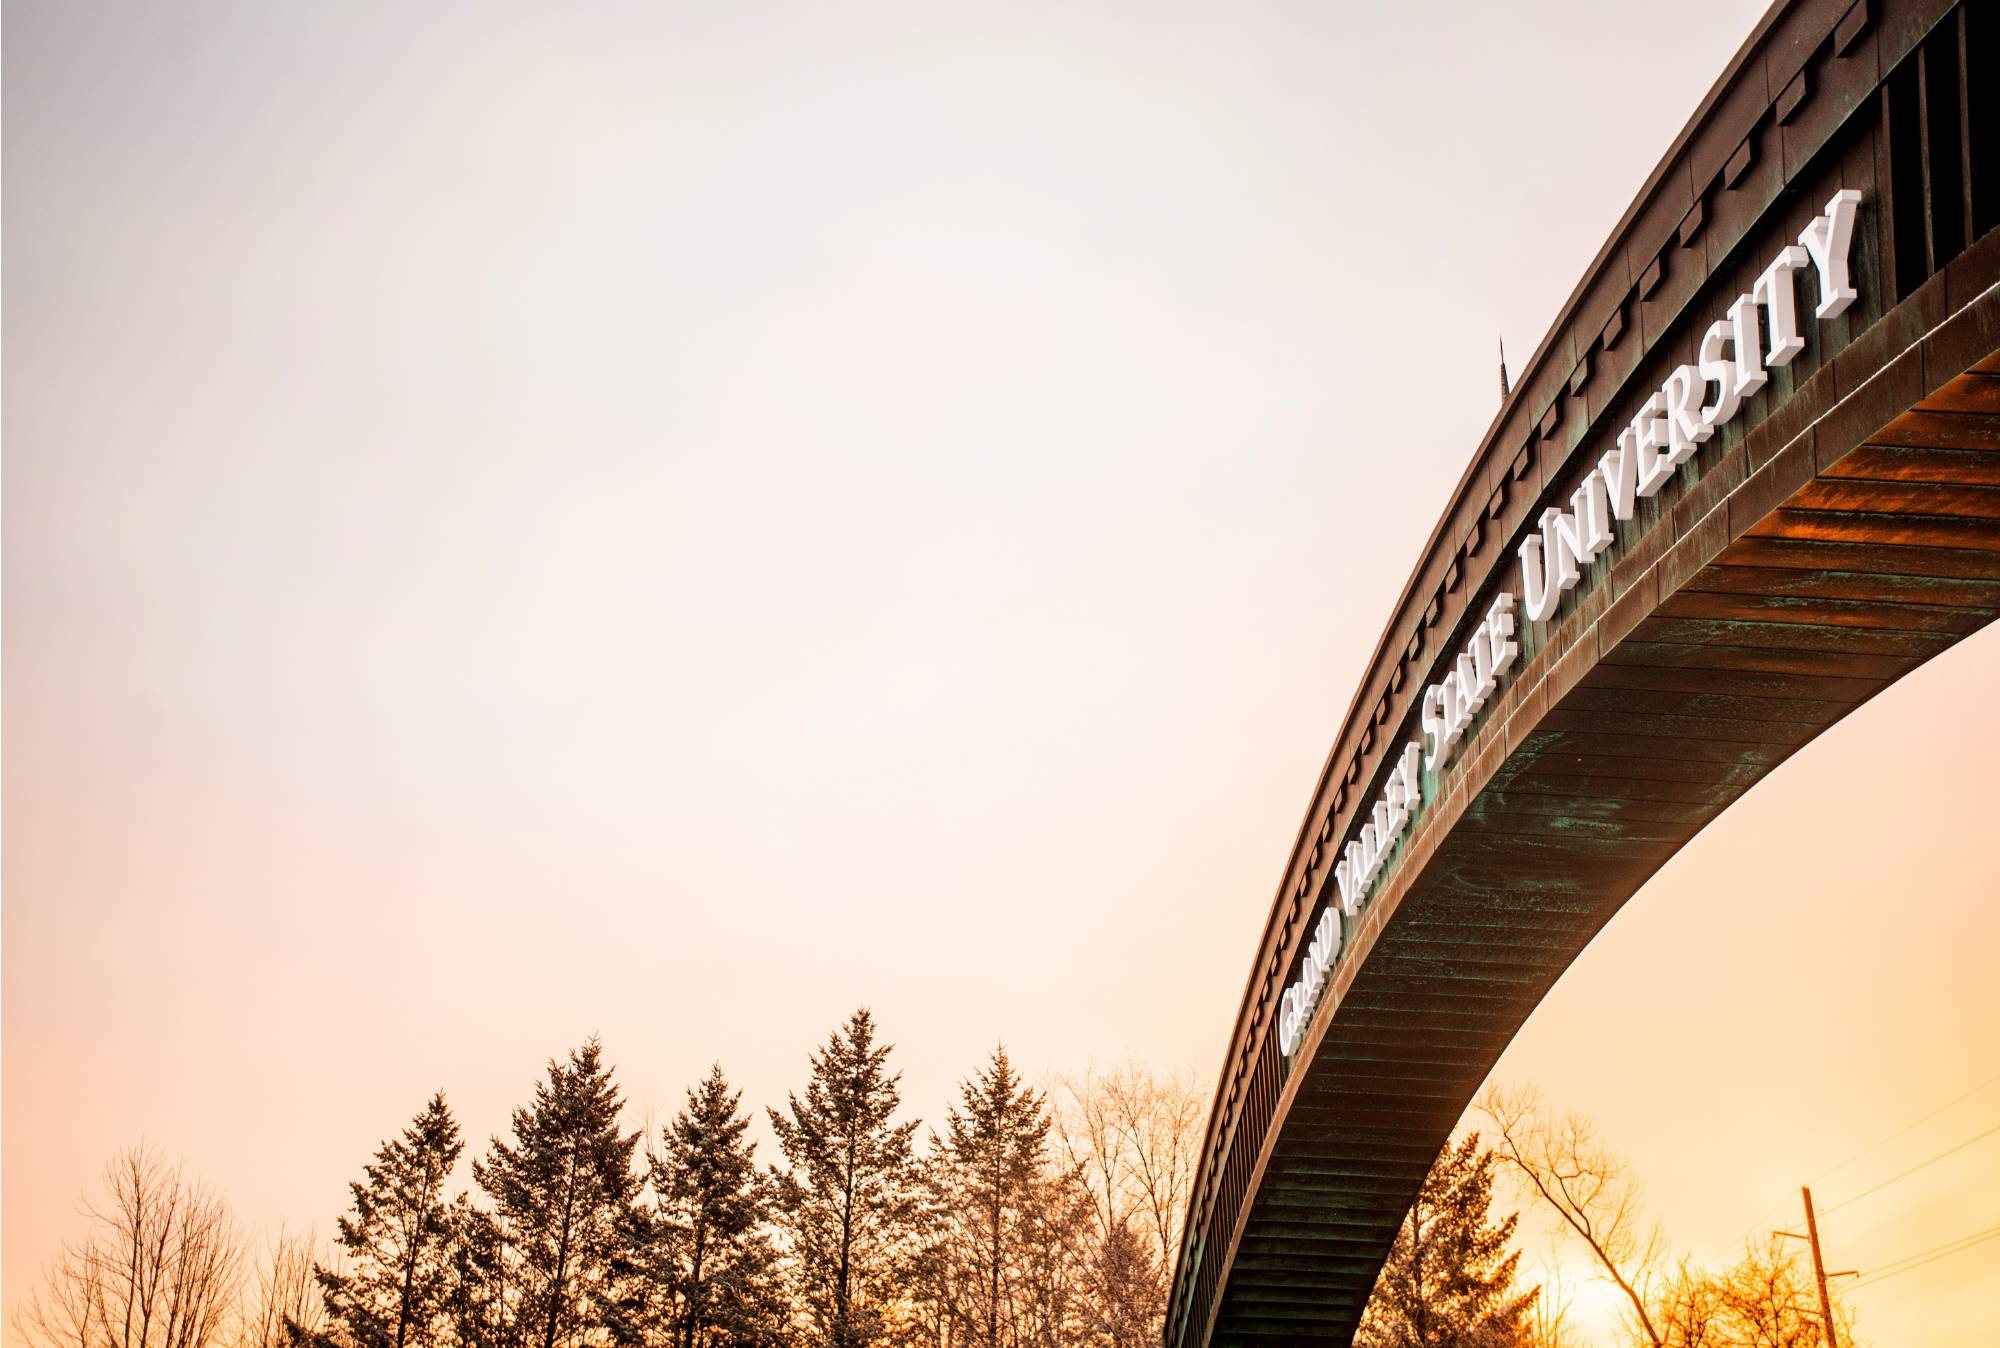 The Grand Valley State University Arch off Lake Michigan Drive that leads into north campus is pictured at sunrise. The sky is pink and orange.